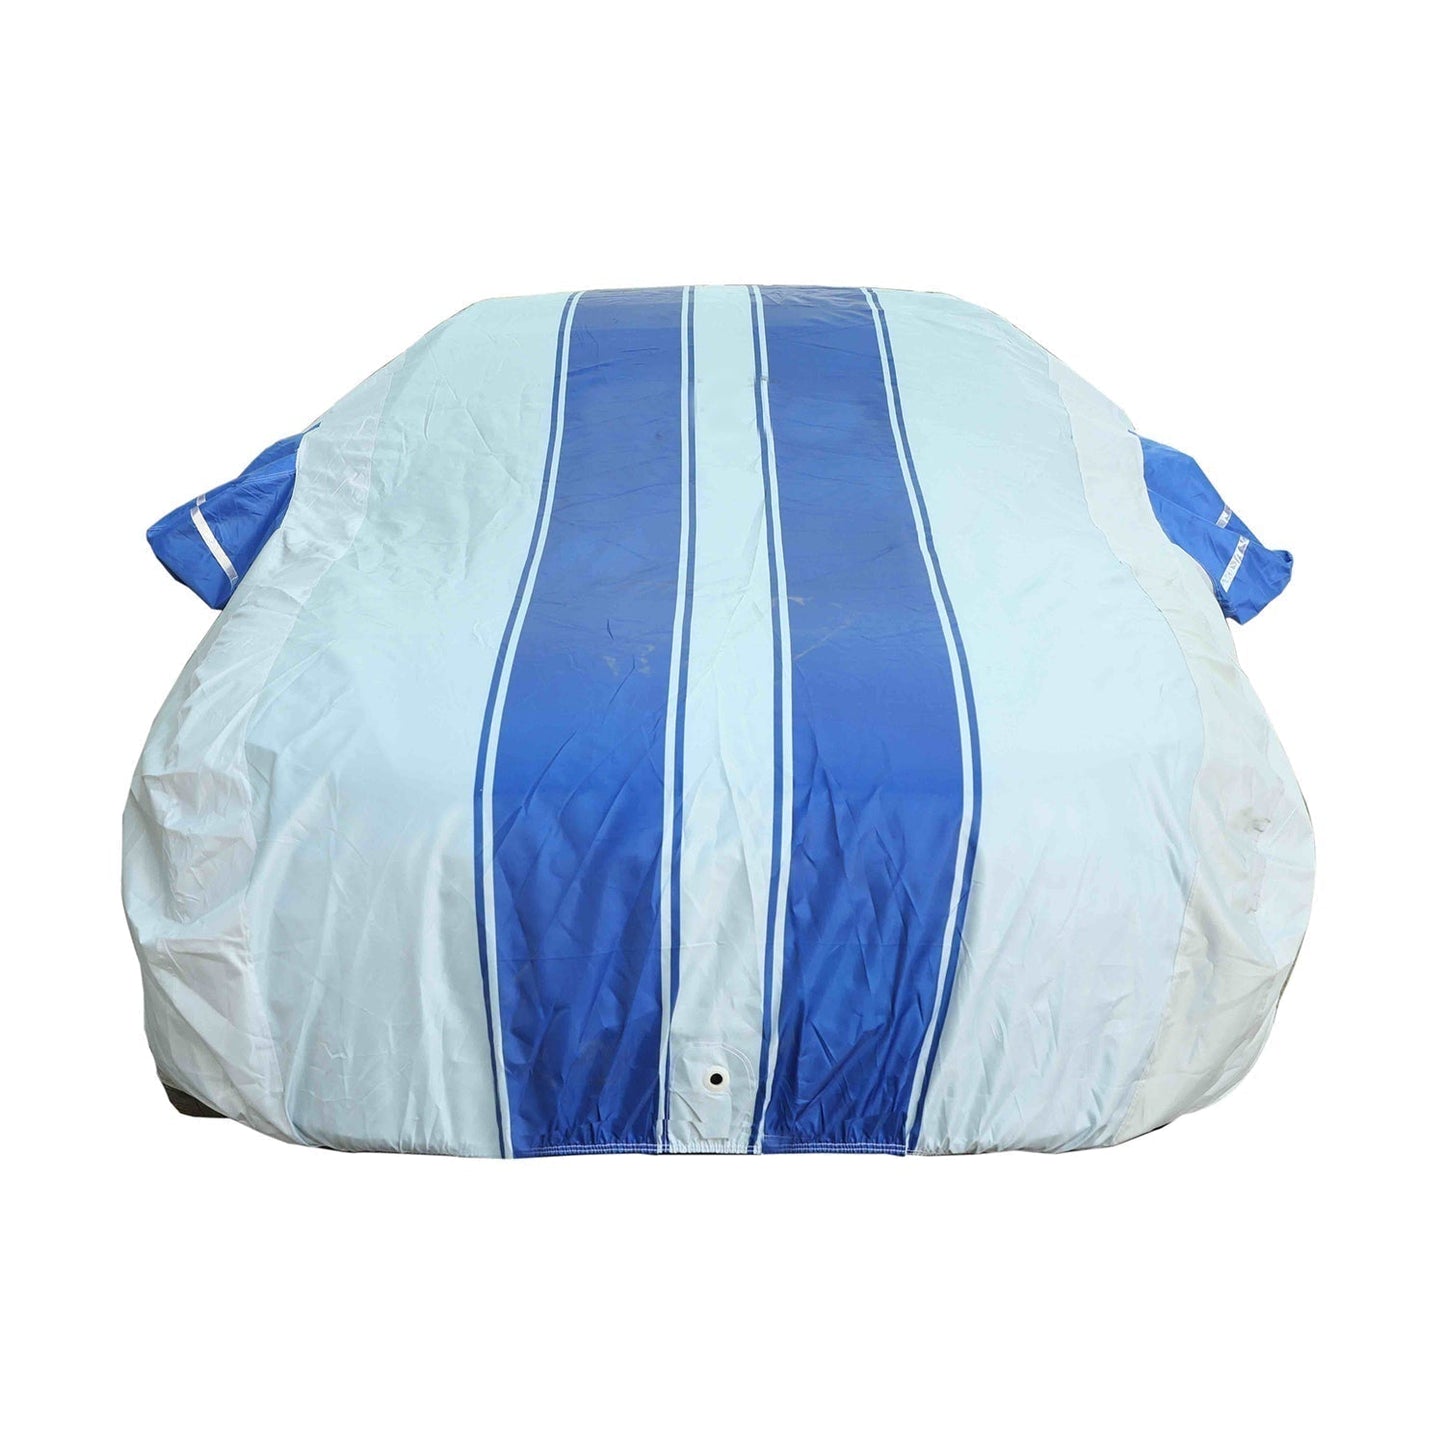 Oshotto 100% Blue dustproof and Water Resistant Car Body Cover with Mirror Pockets For Mitsubishi Outlander